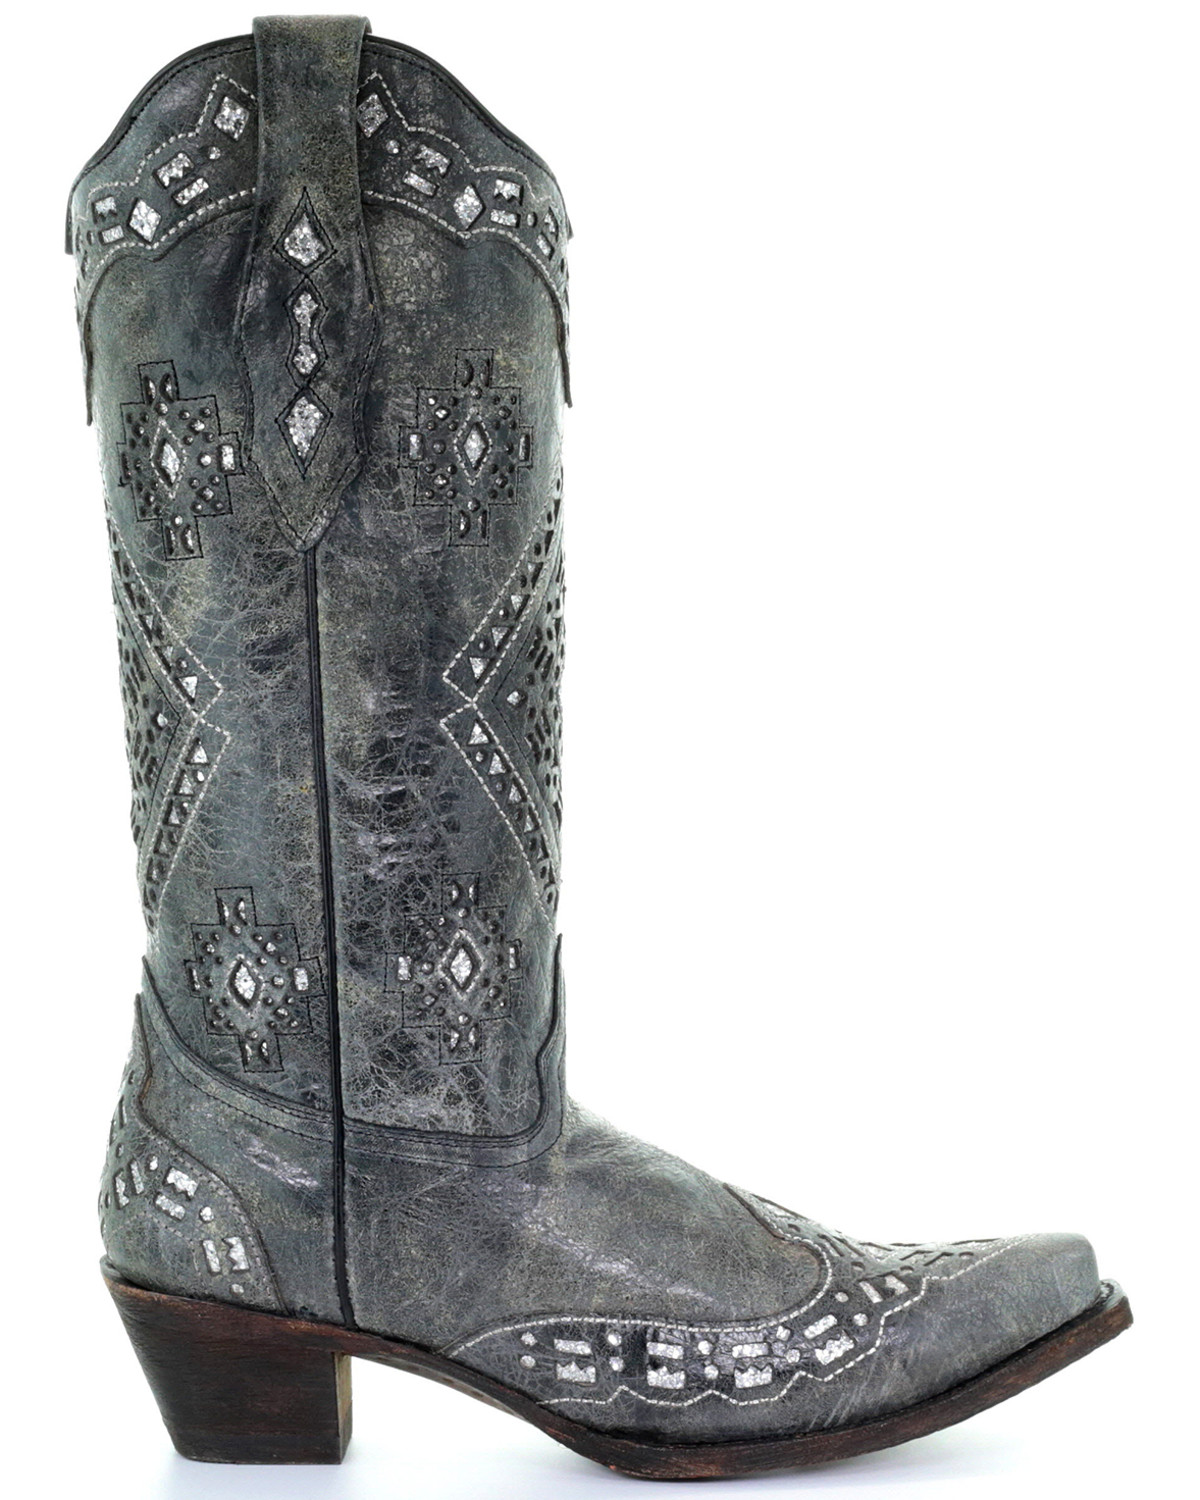 Corral Glitter Inlay Cowgirl Boots - Snip Toe - Country Outfitter